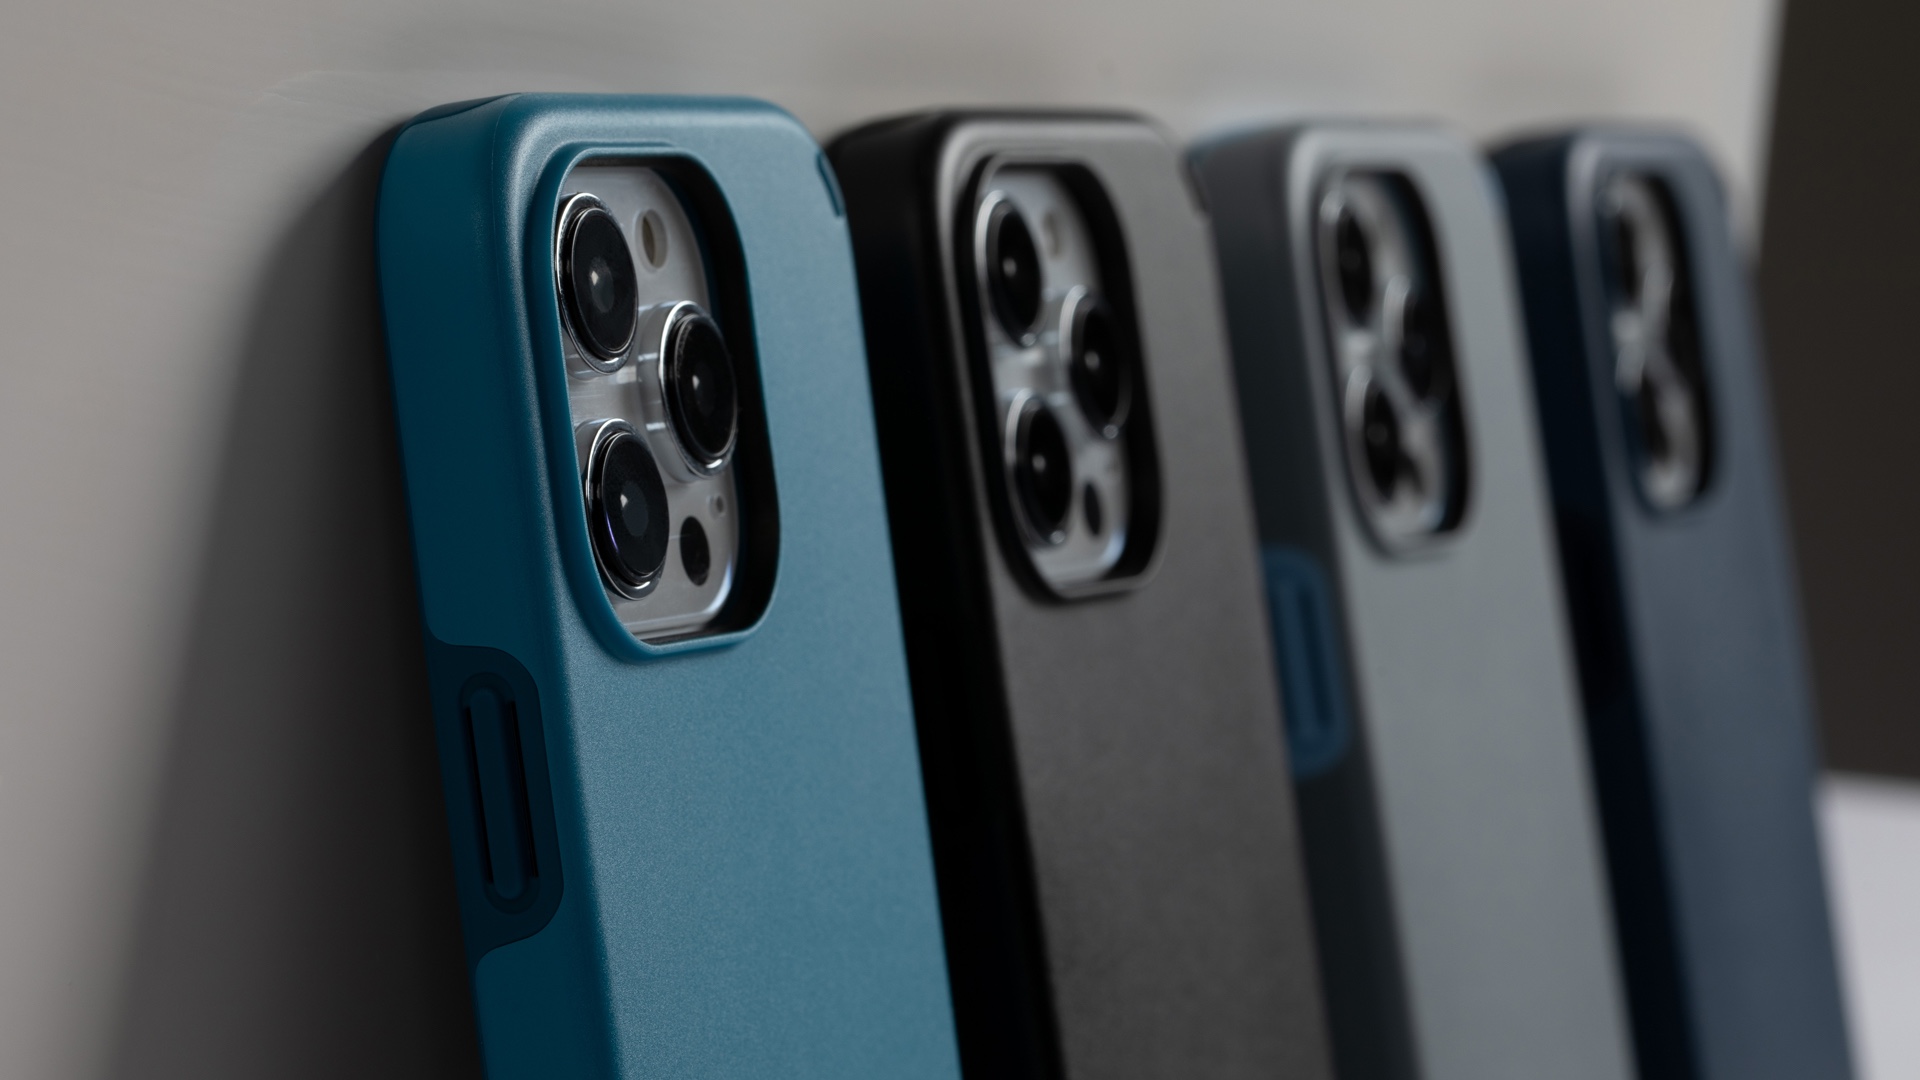 Suitable Case Size: Finding The Right Case For IPhone 14 Pro Max